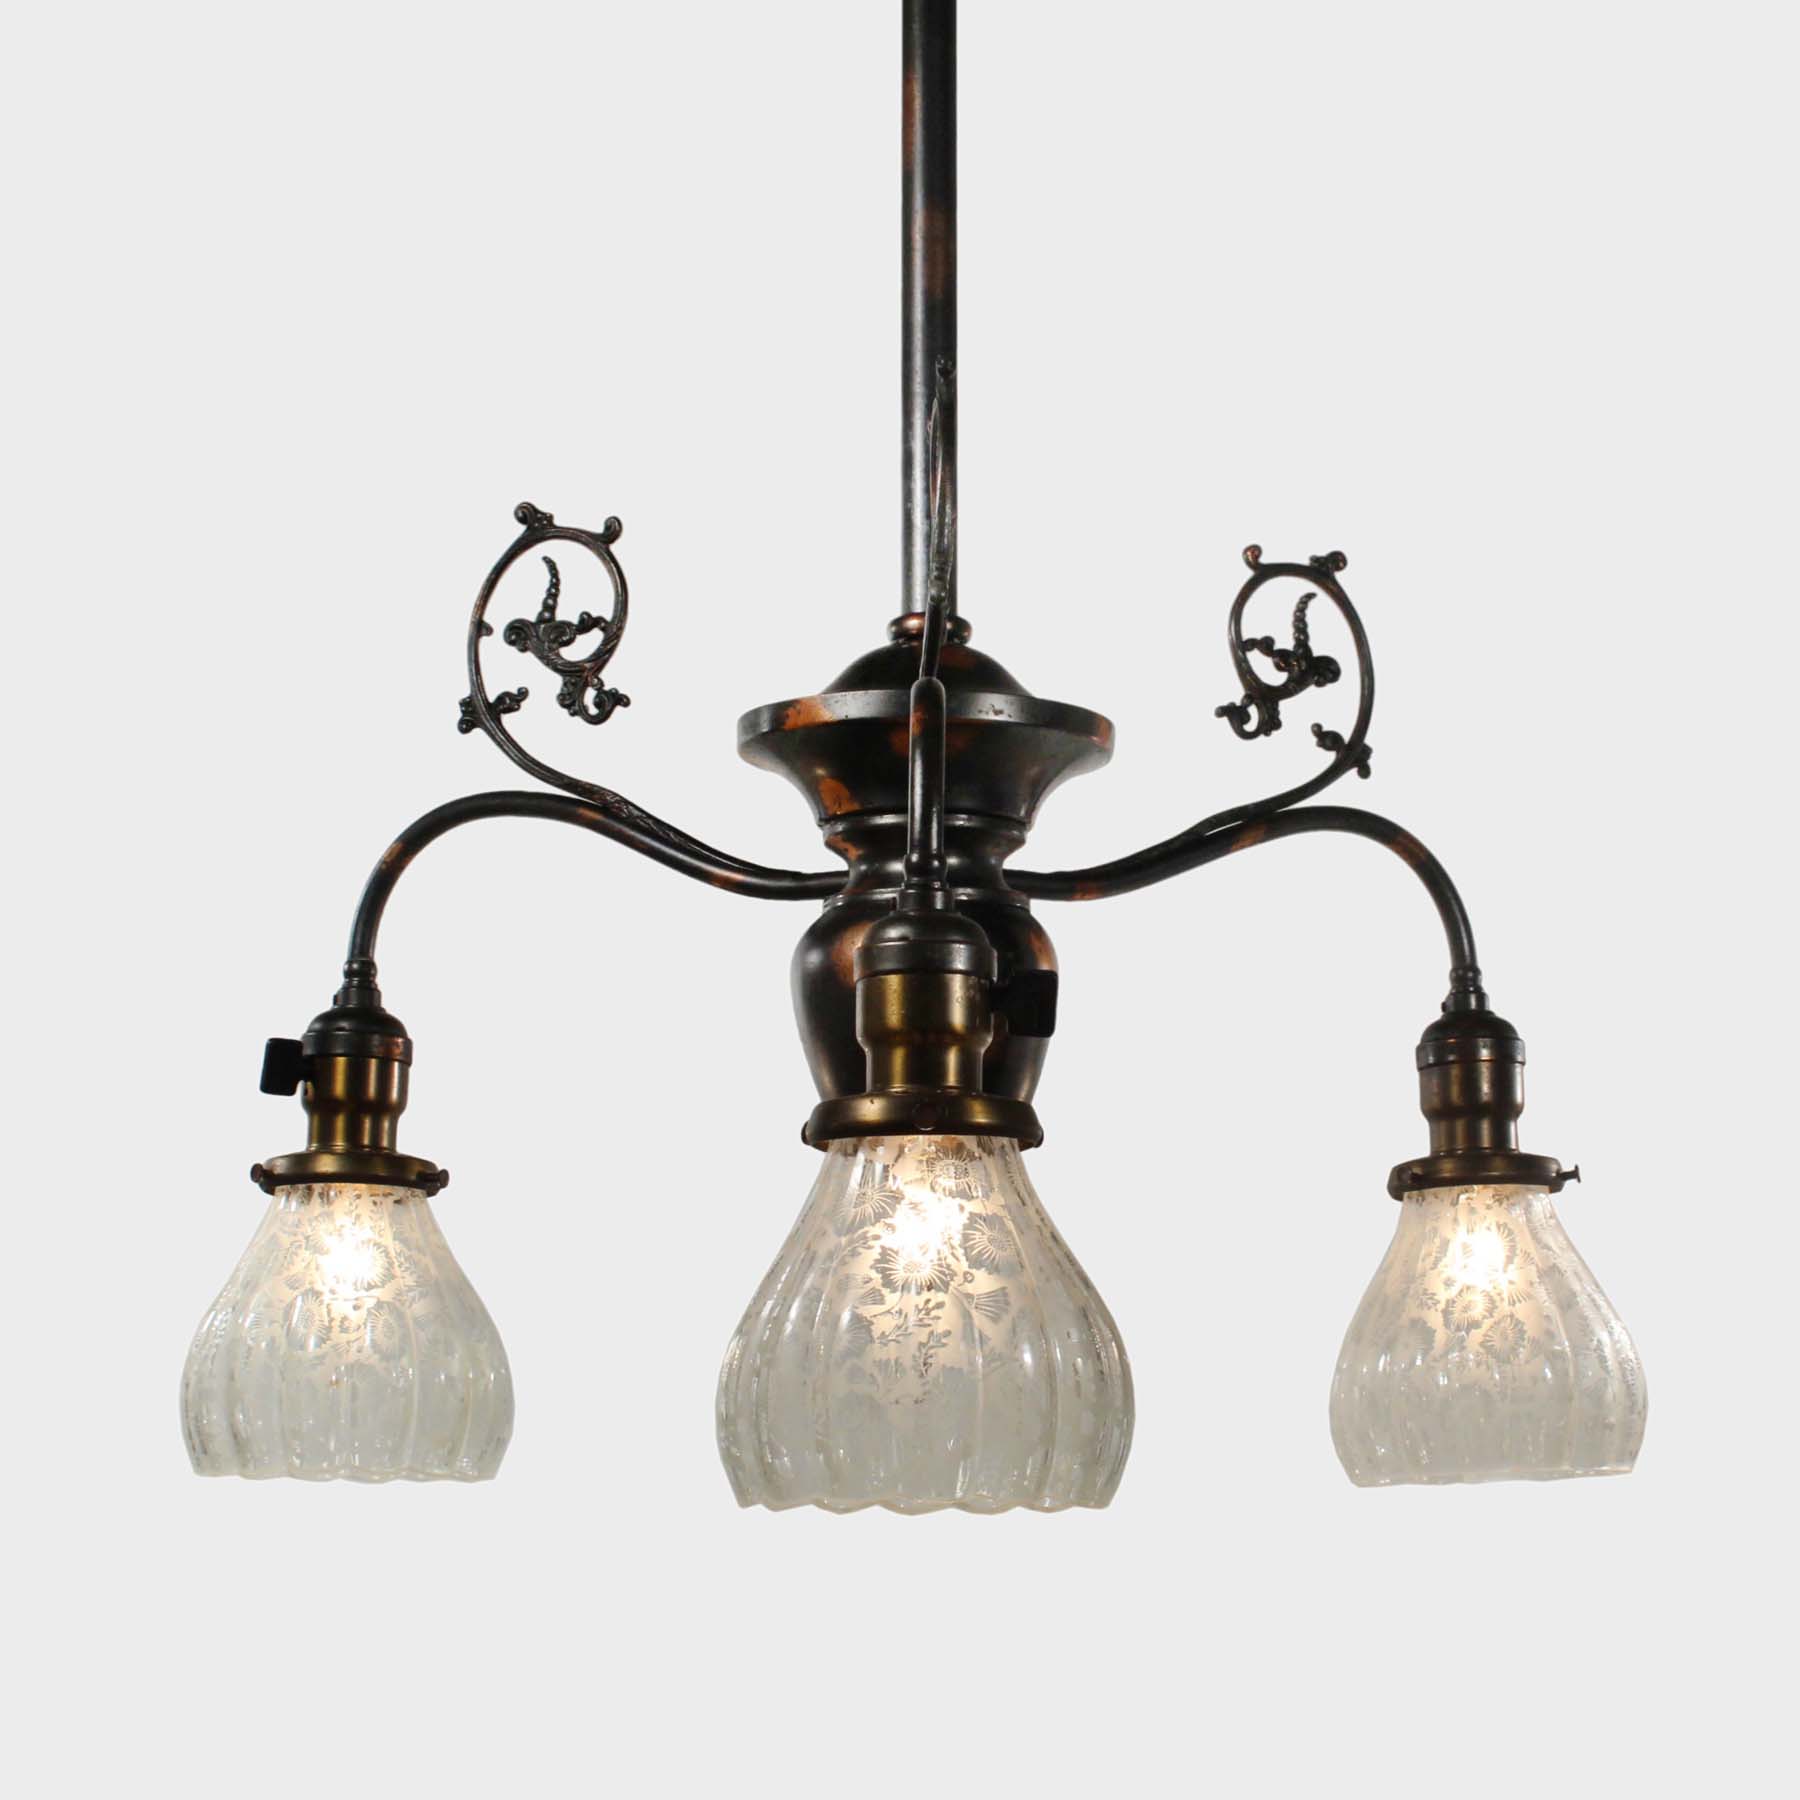 SOLD Antique Gas Chandelier with Original Glass Shades, c. 1880-67948